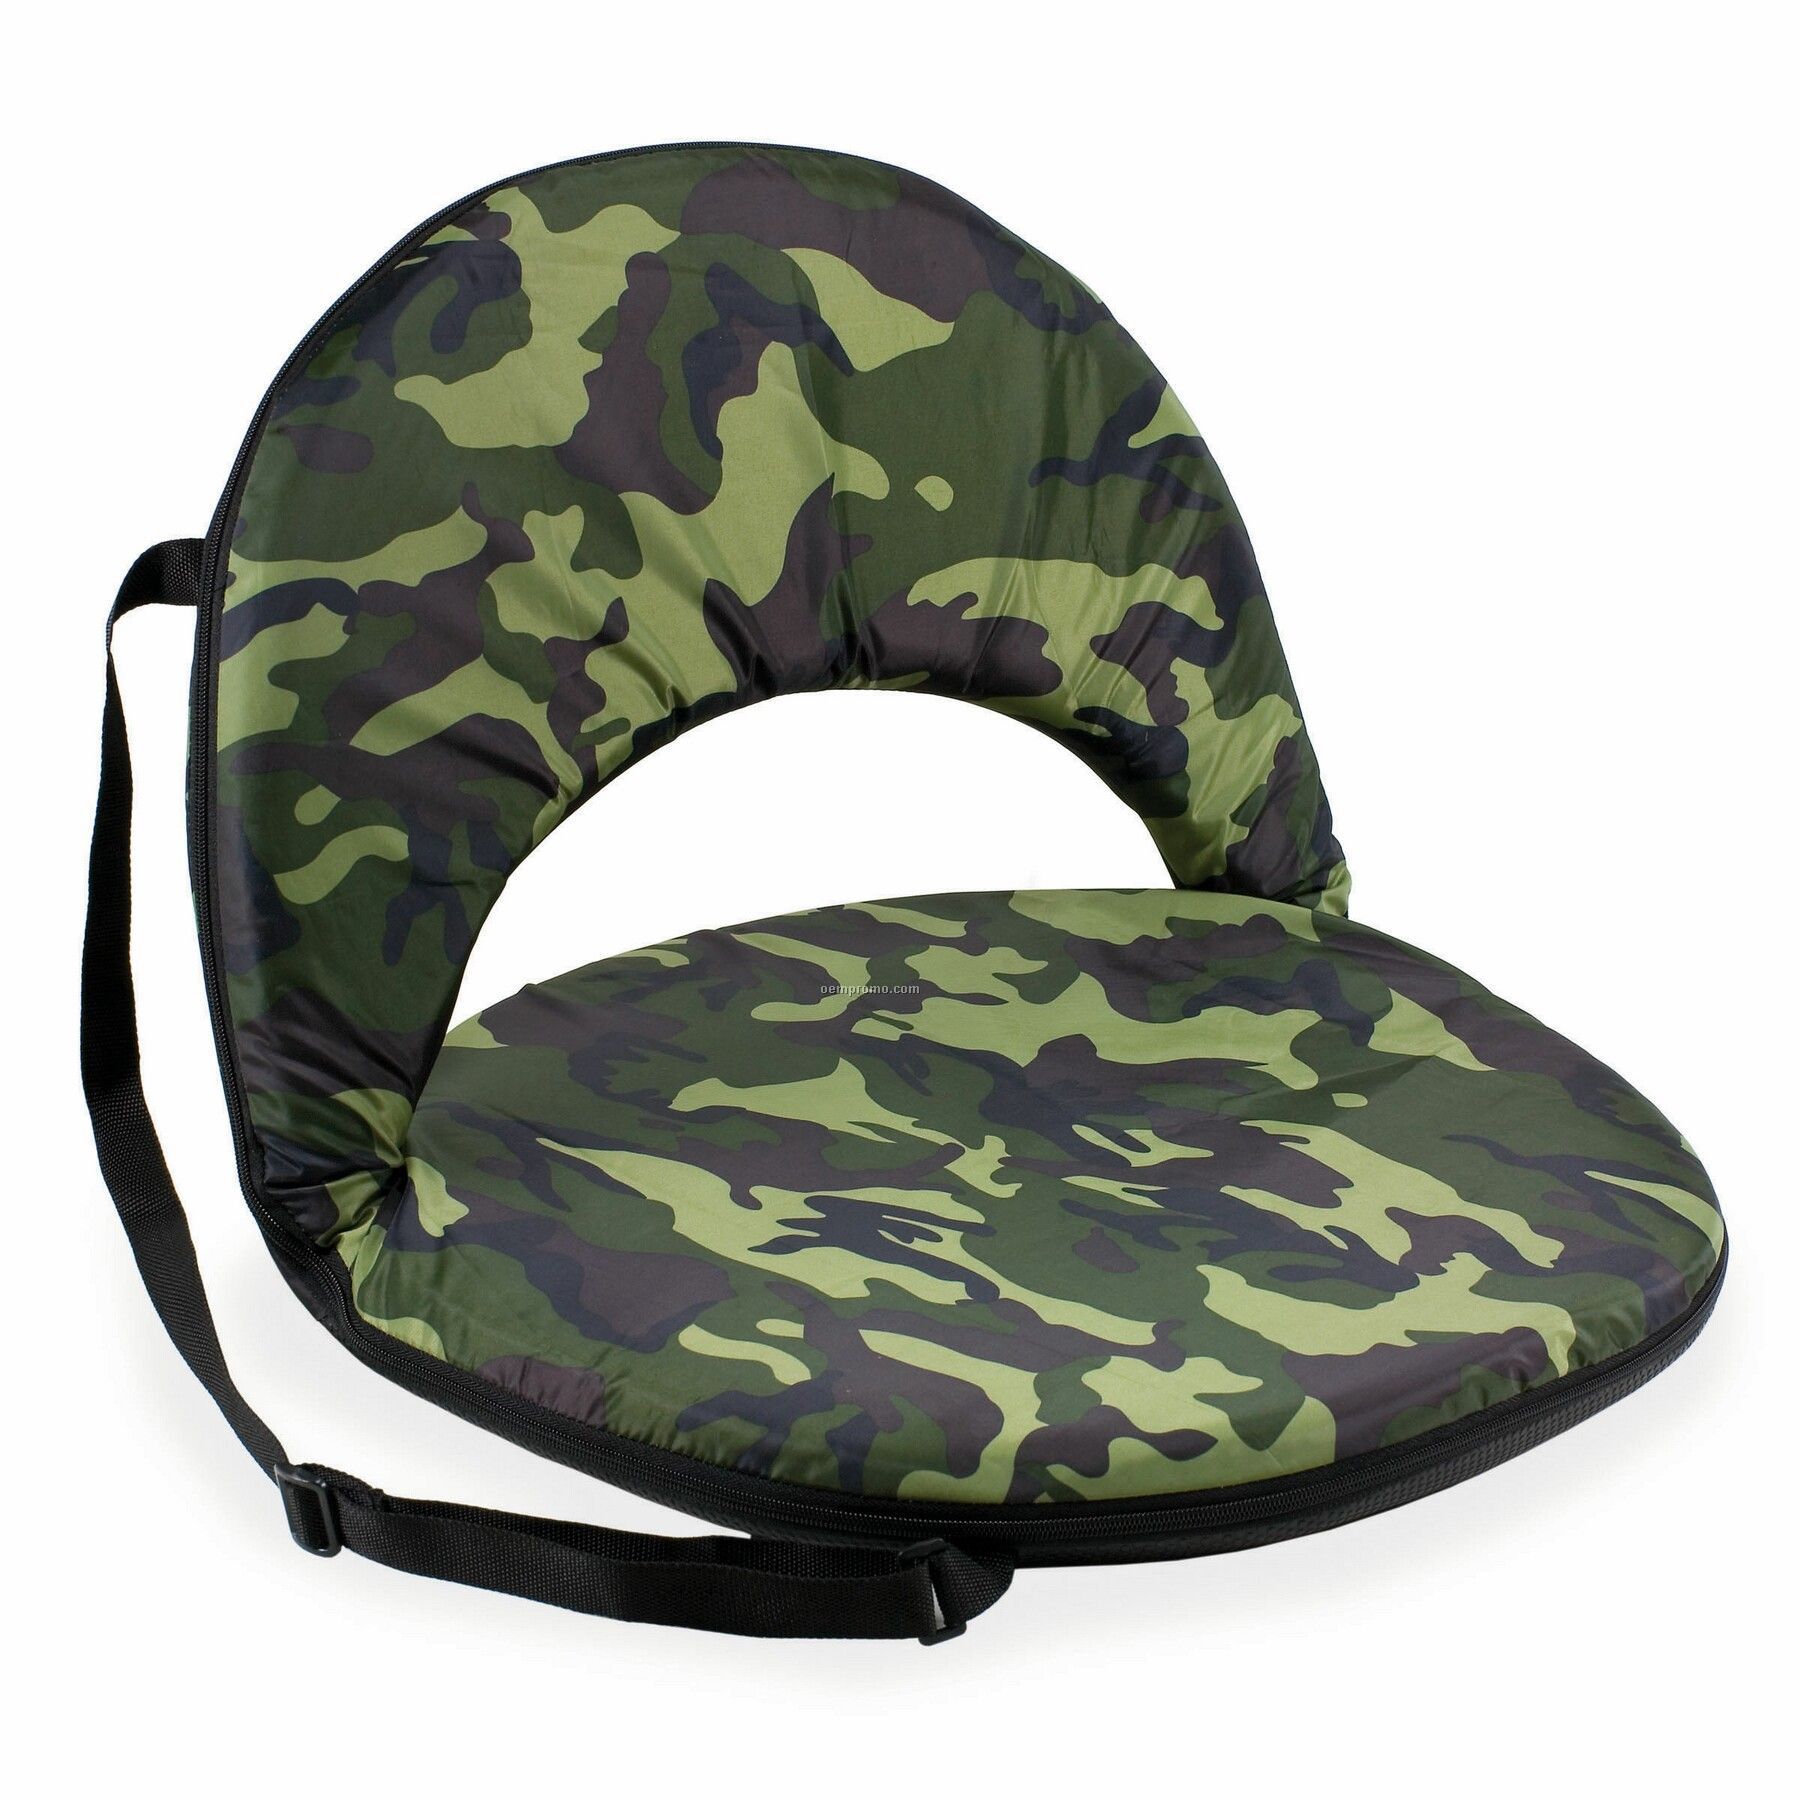 Oniva Seat Camouflage Oval Recreational Recliner